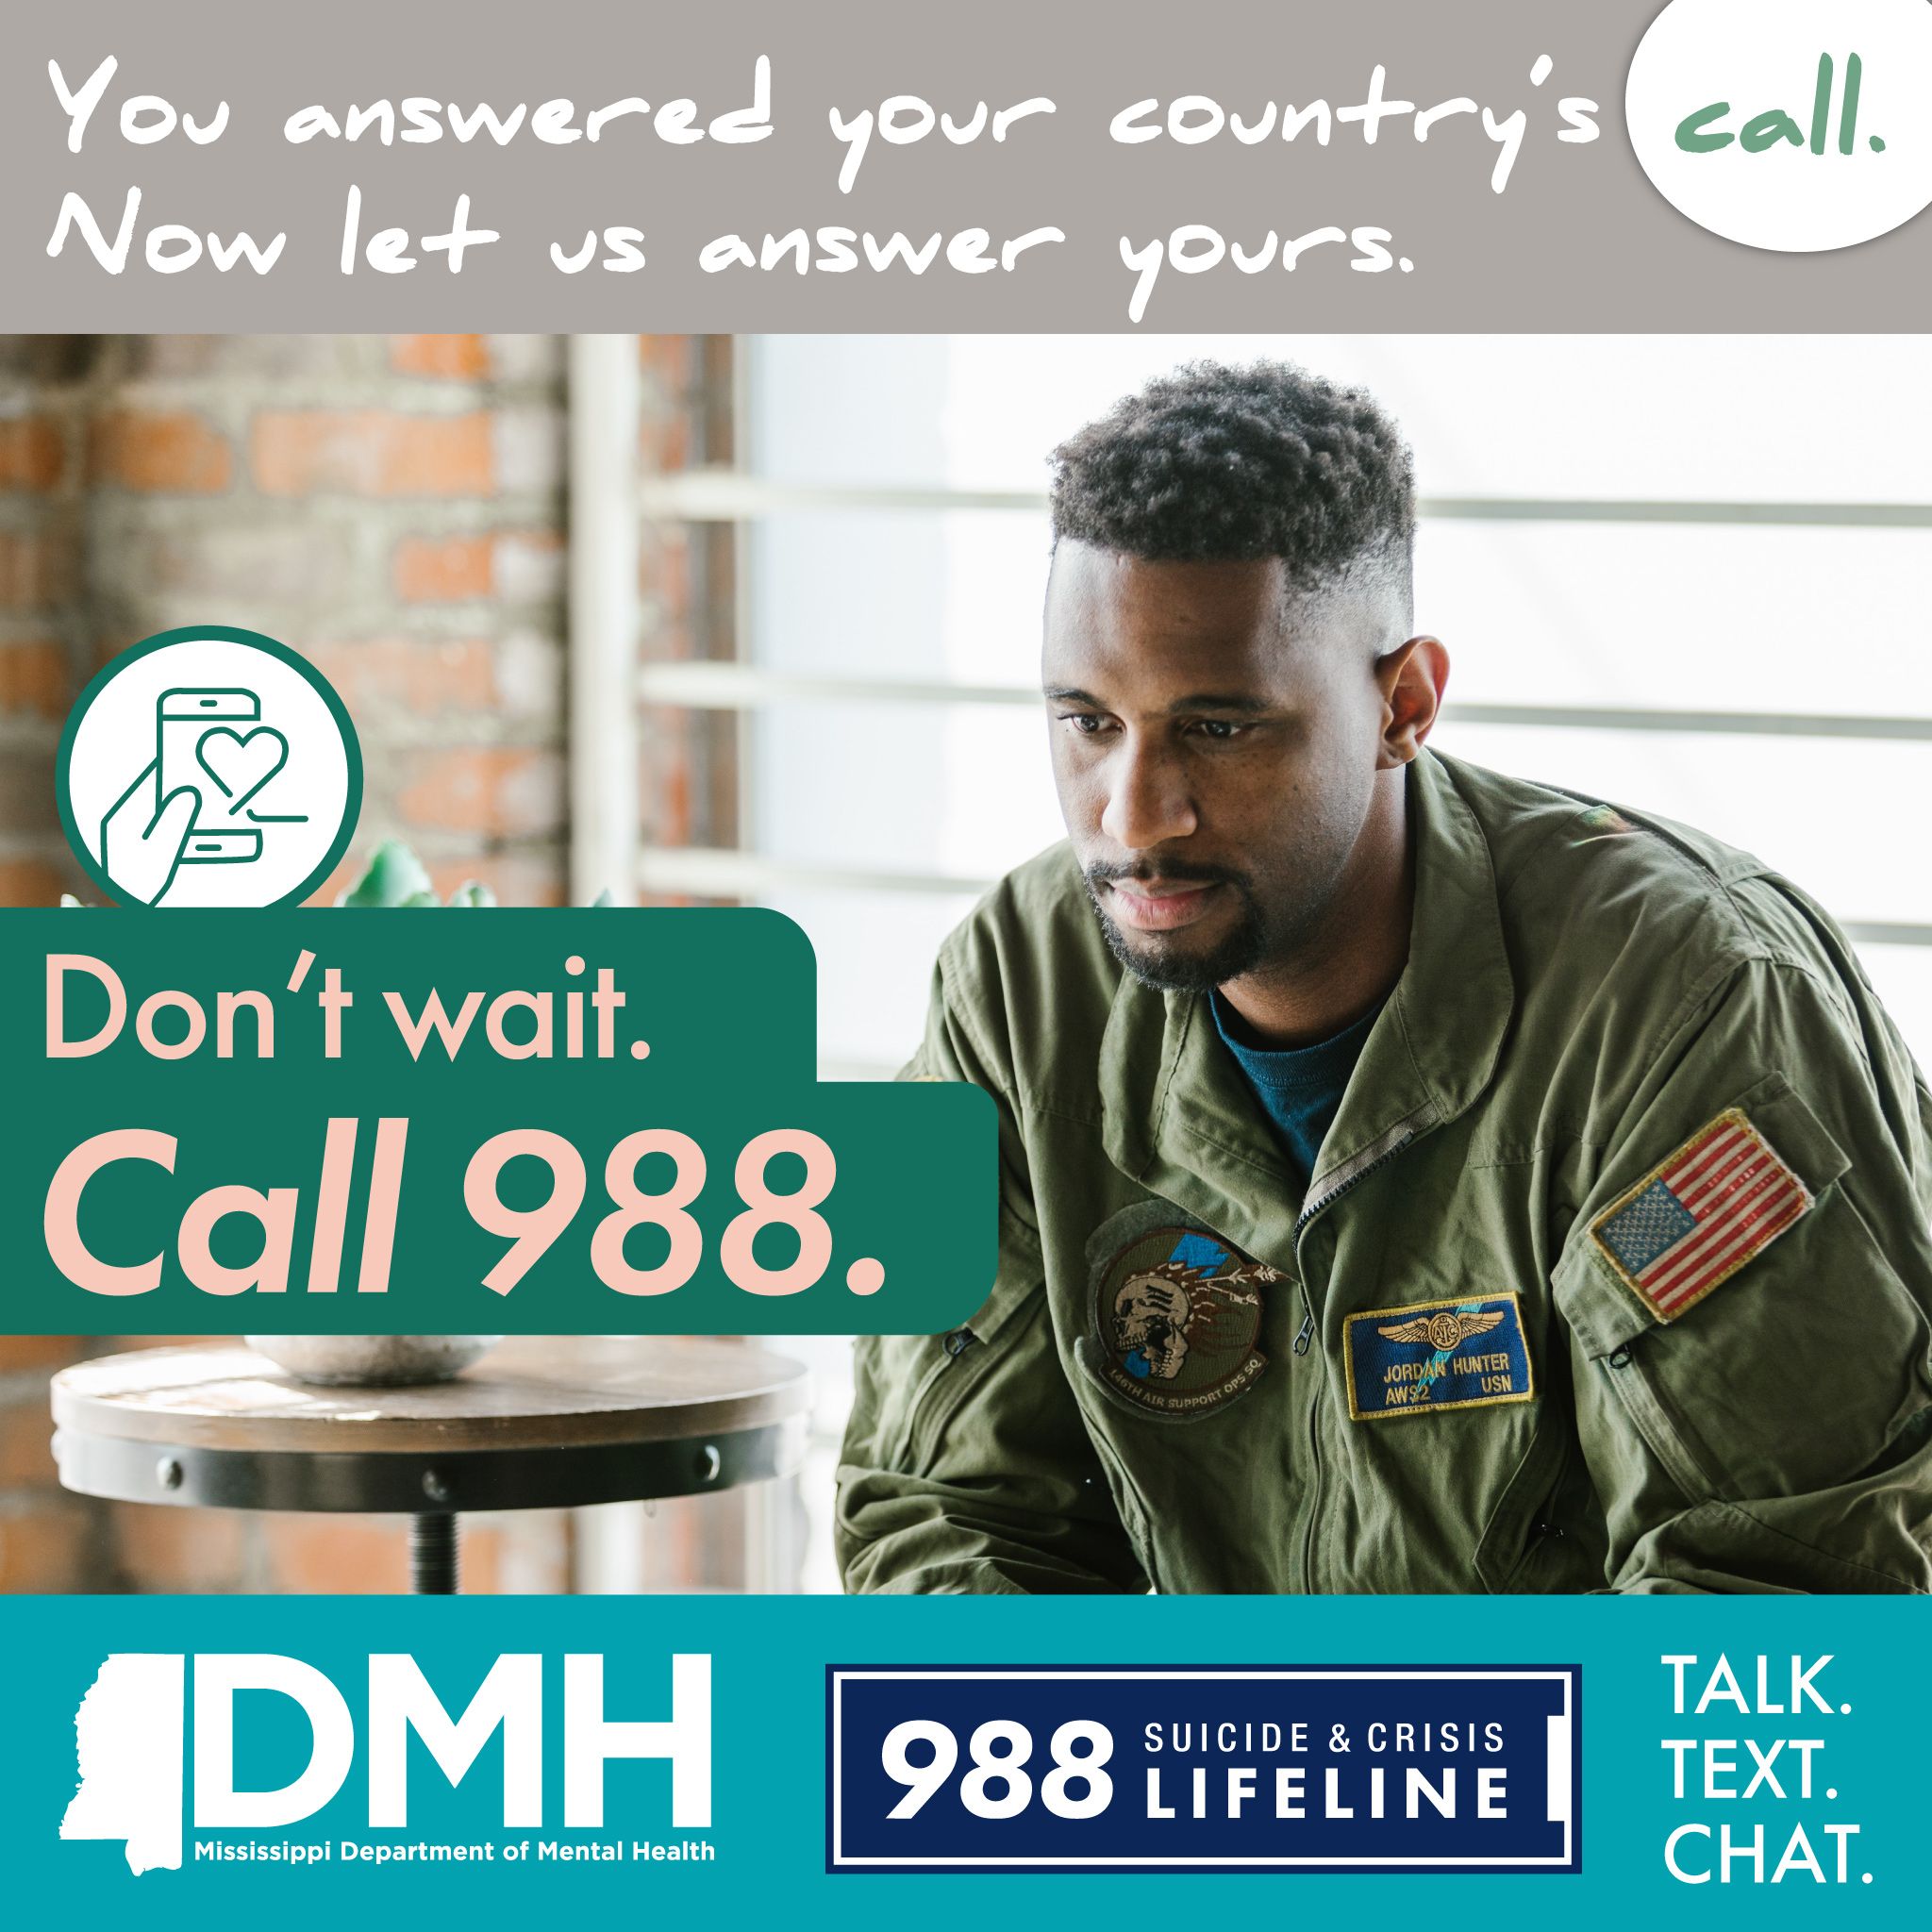 You answered your country's call. Now let us answer yours.